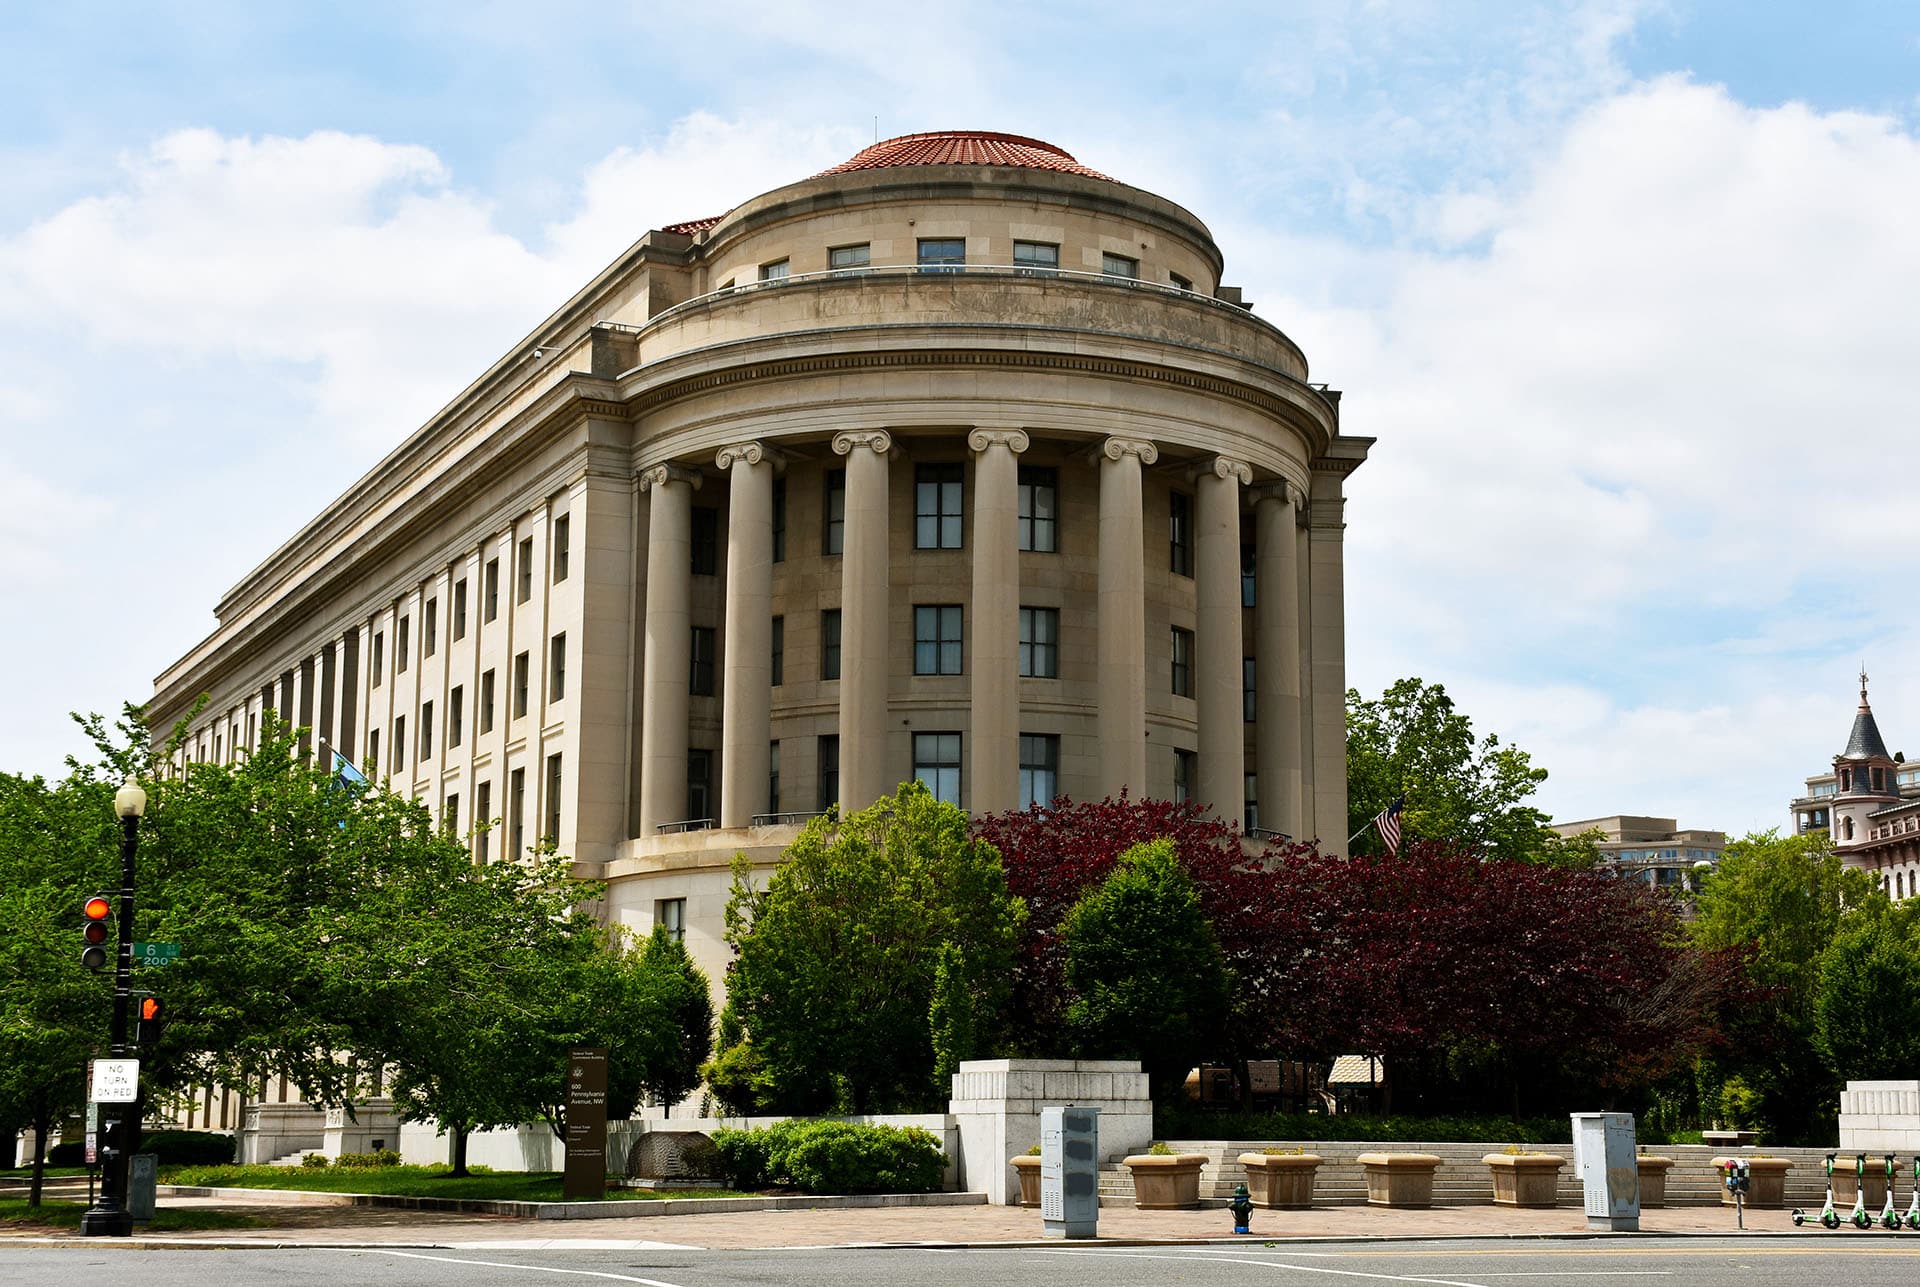 A large, historic building with a sandstone façade featuring tall columns and a rounded, domed roof. It is surrounded by trees and greenery, with a street intersection in the foreground. The sky is partly cloudy.